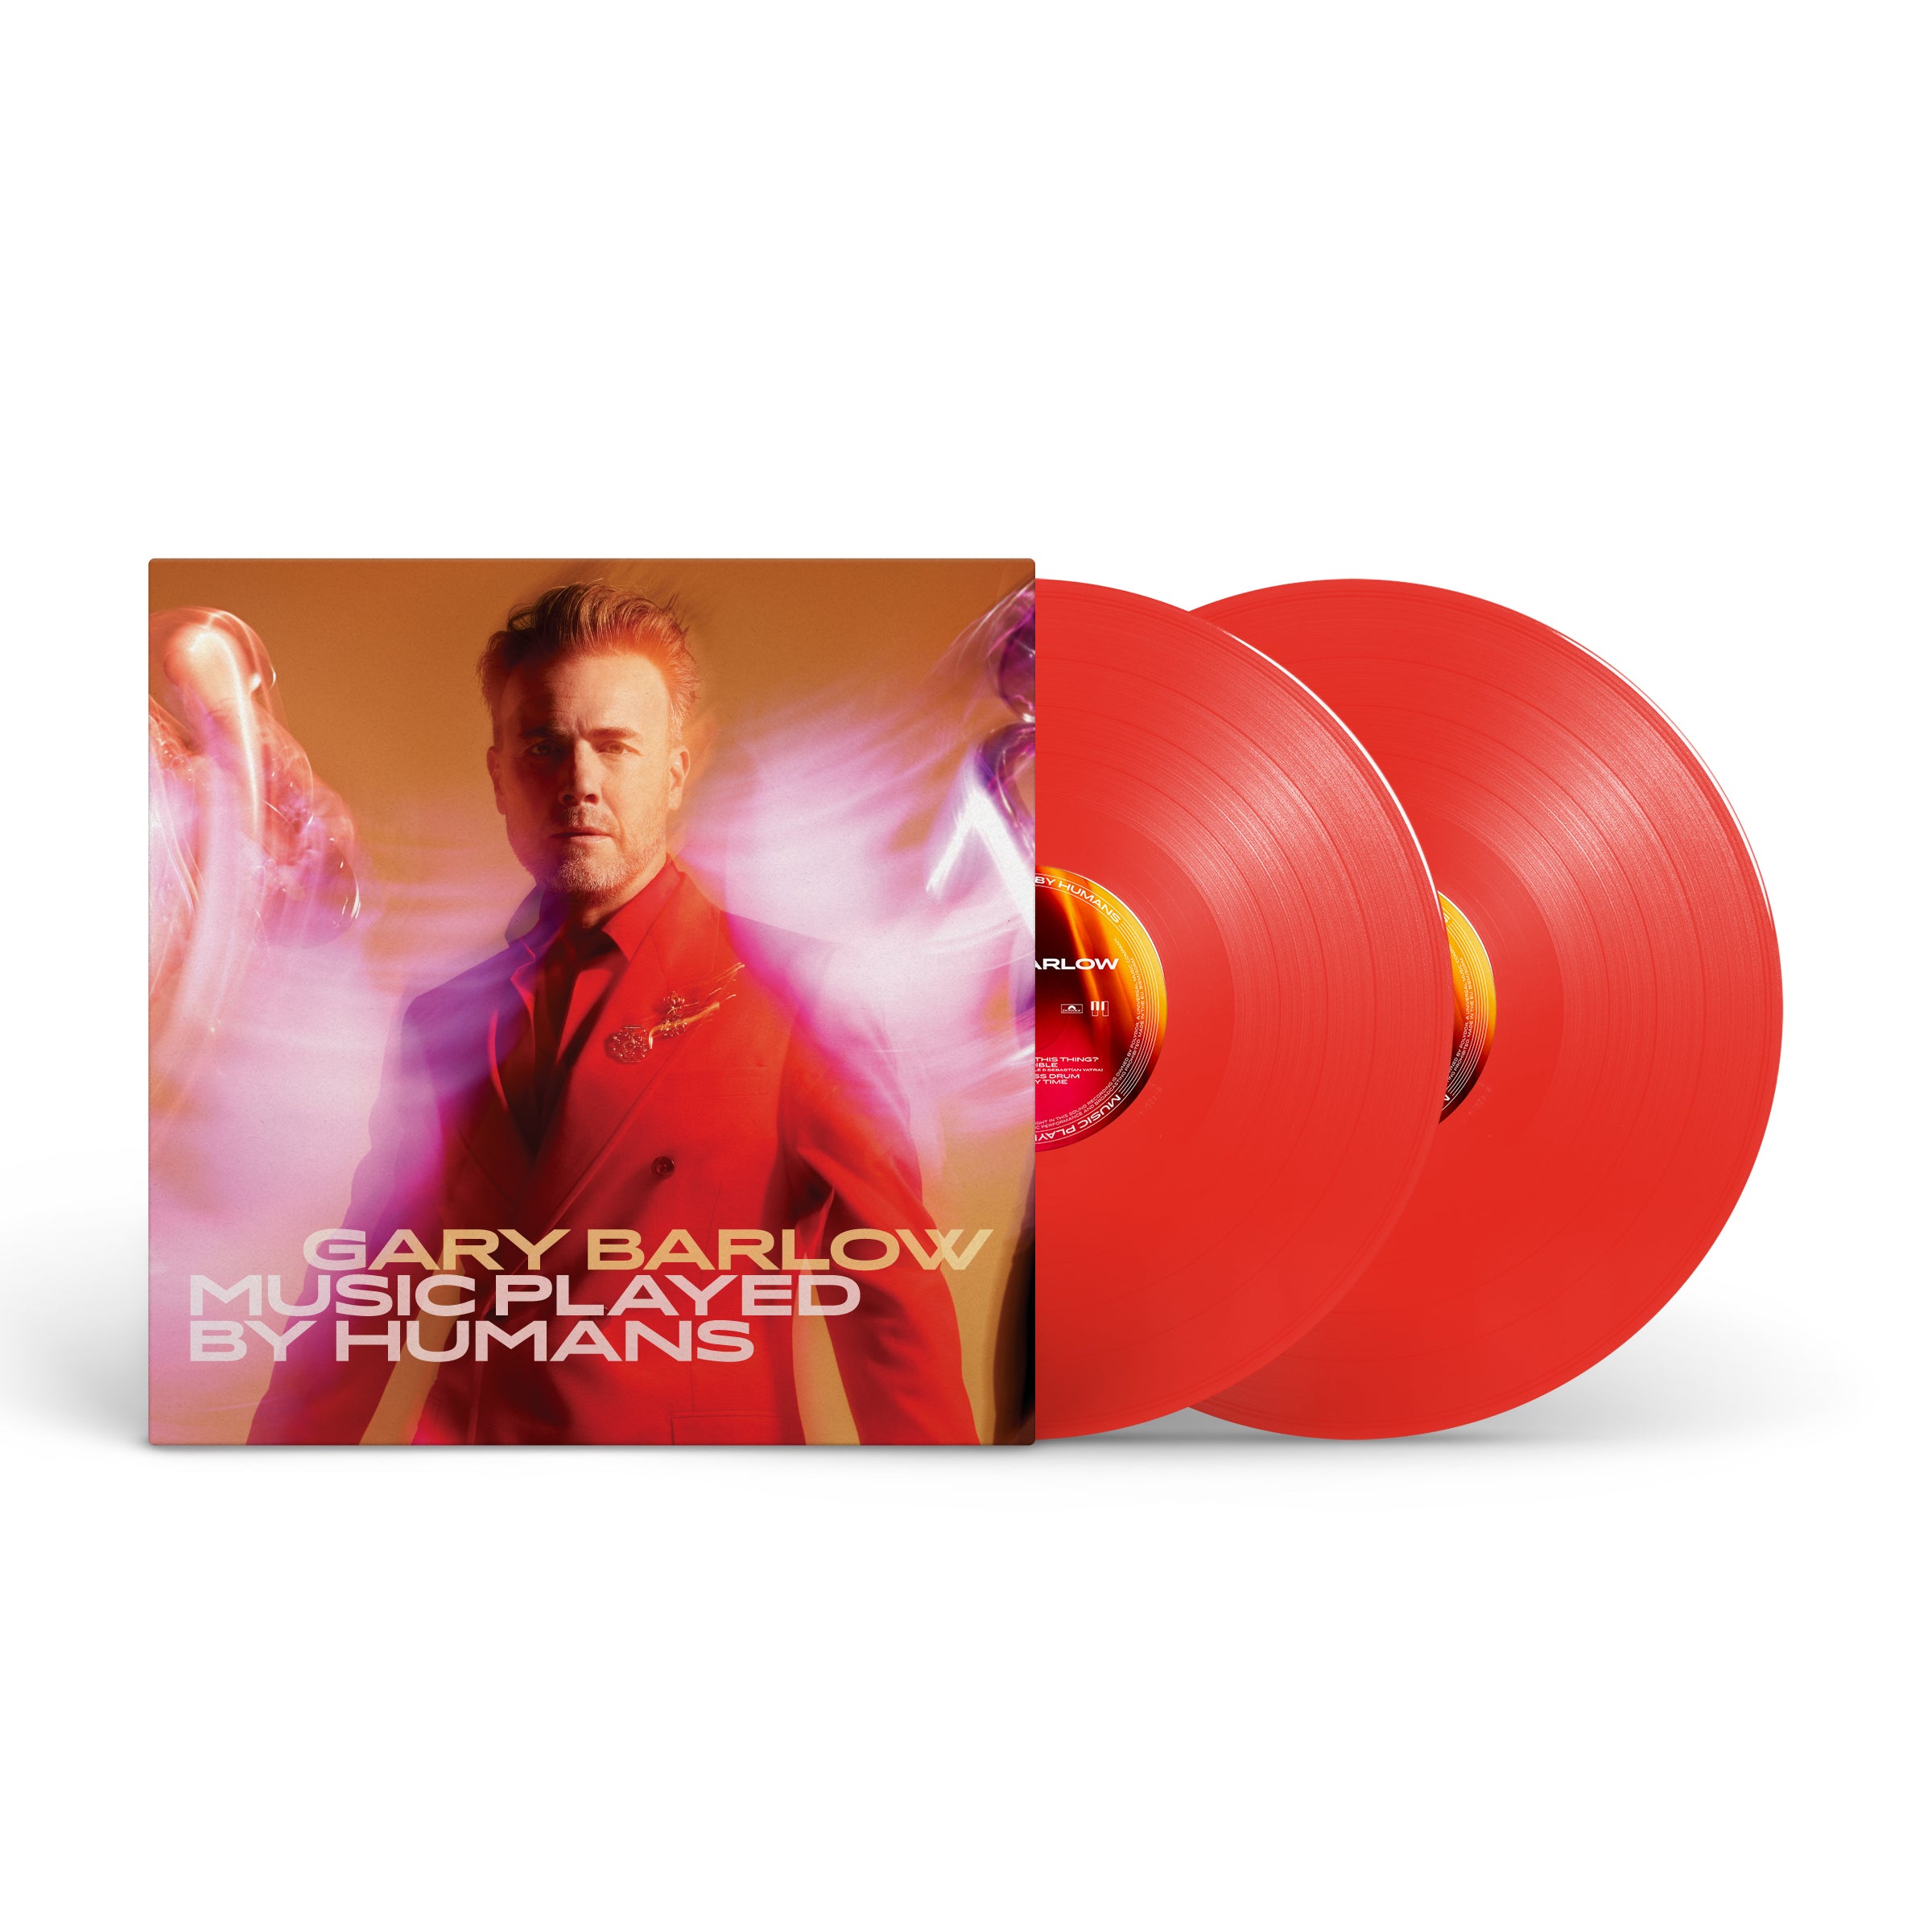 Gary Barlow - Music Played By Humans Limited Edition Gatefold Red Vinyl 2LP